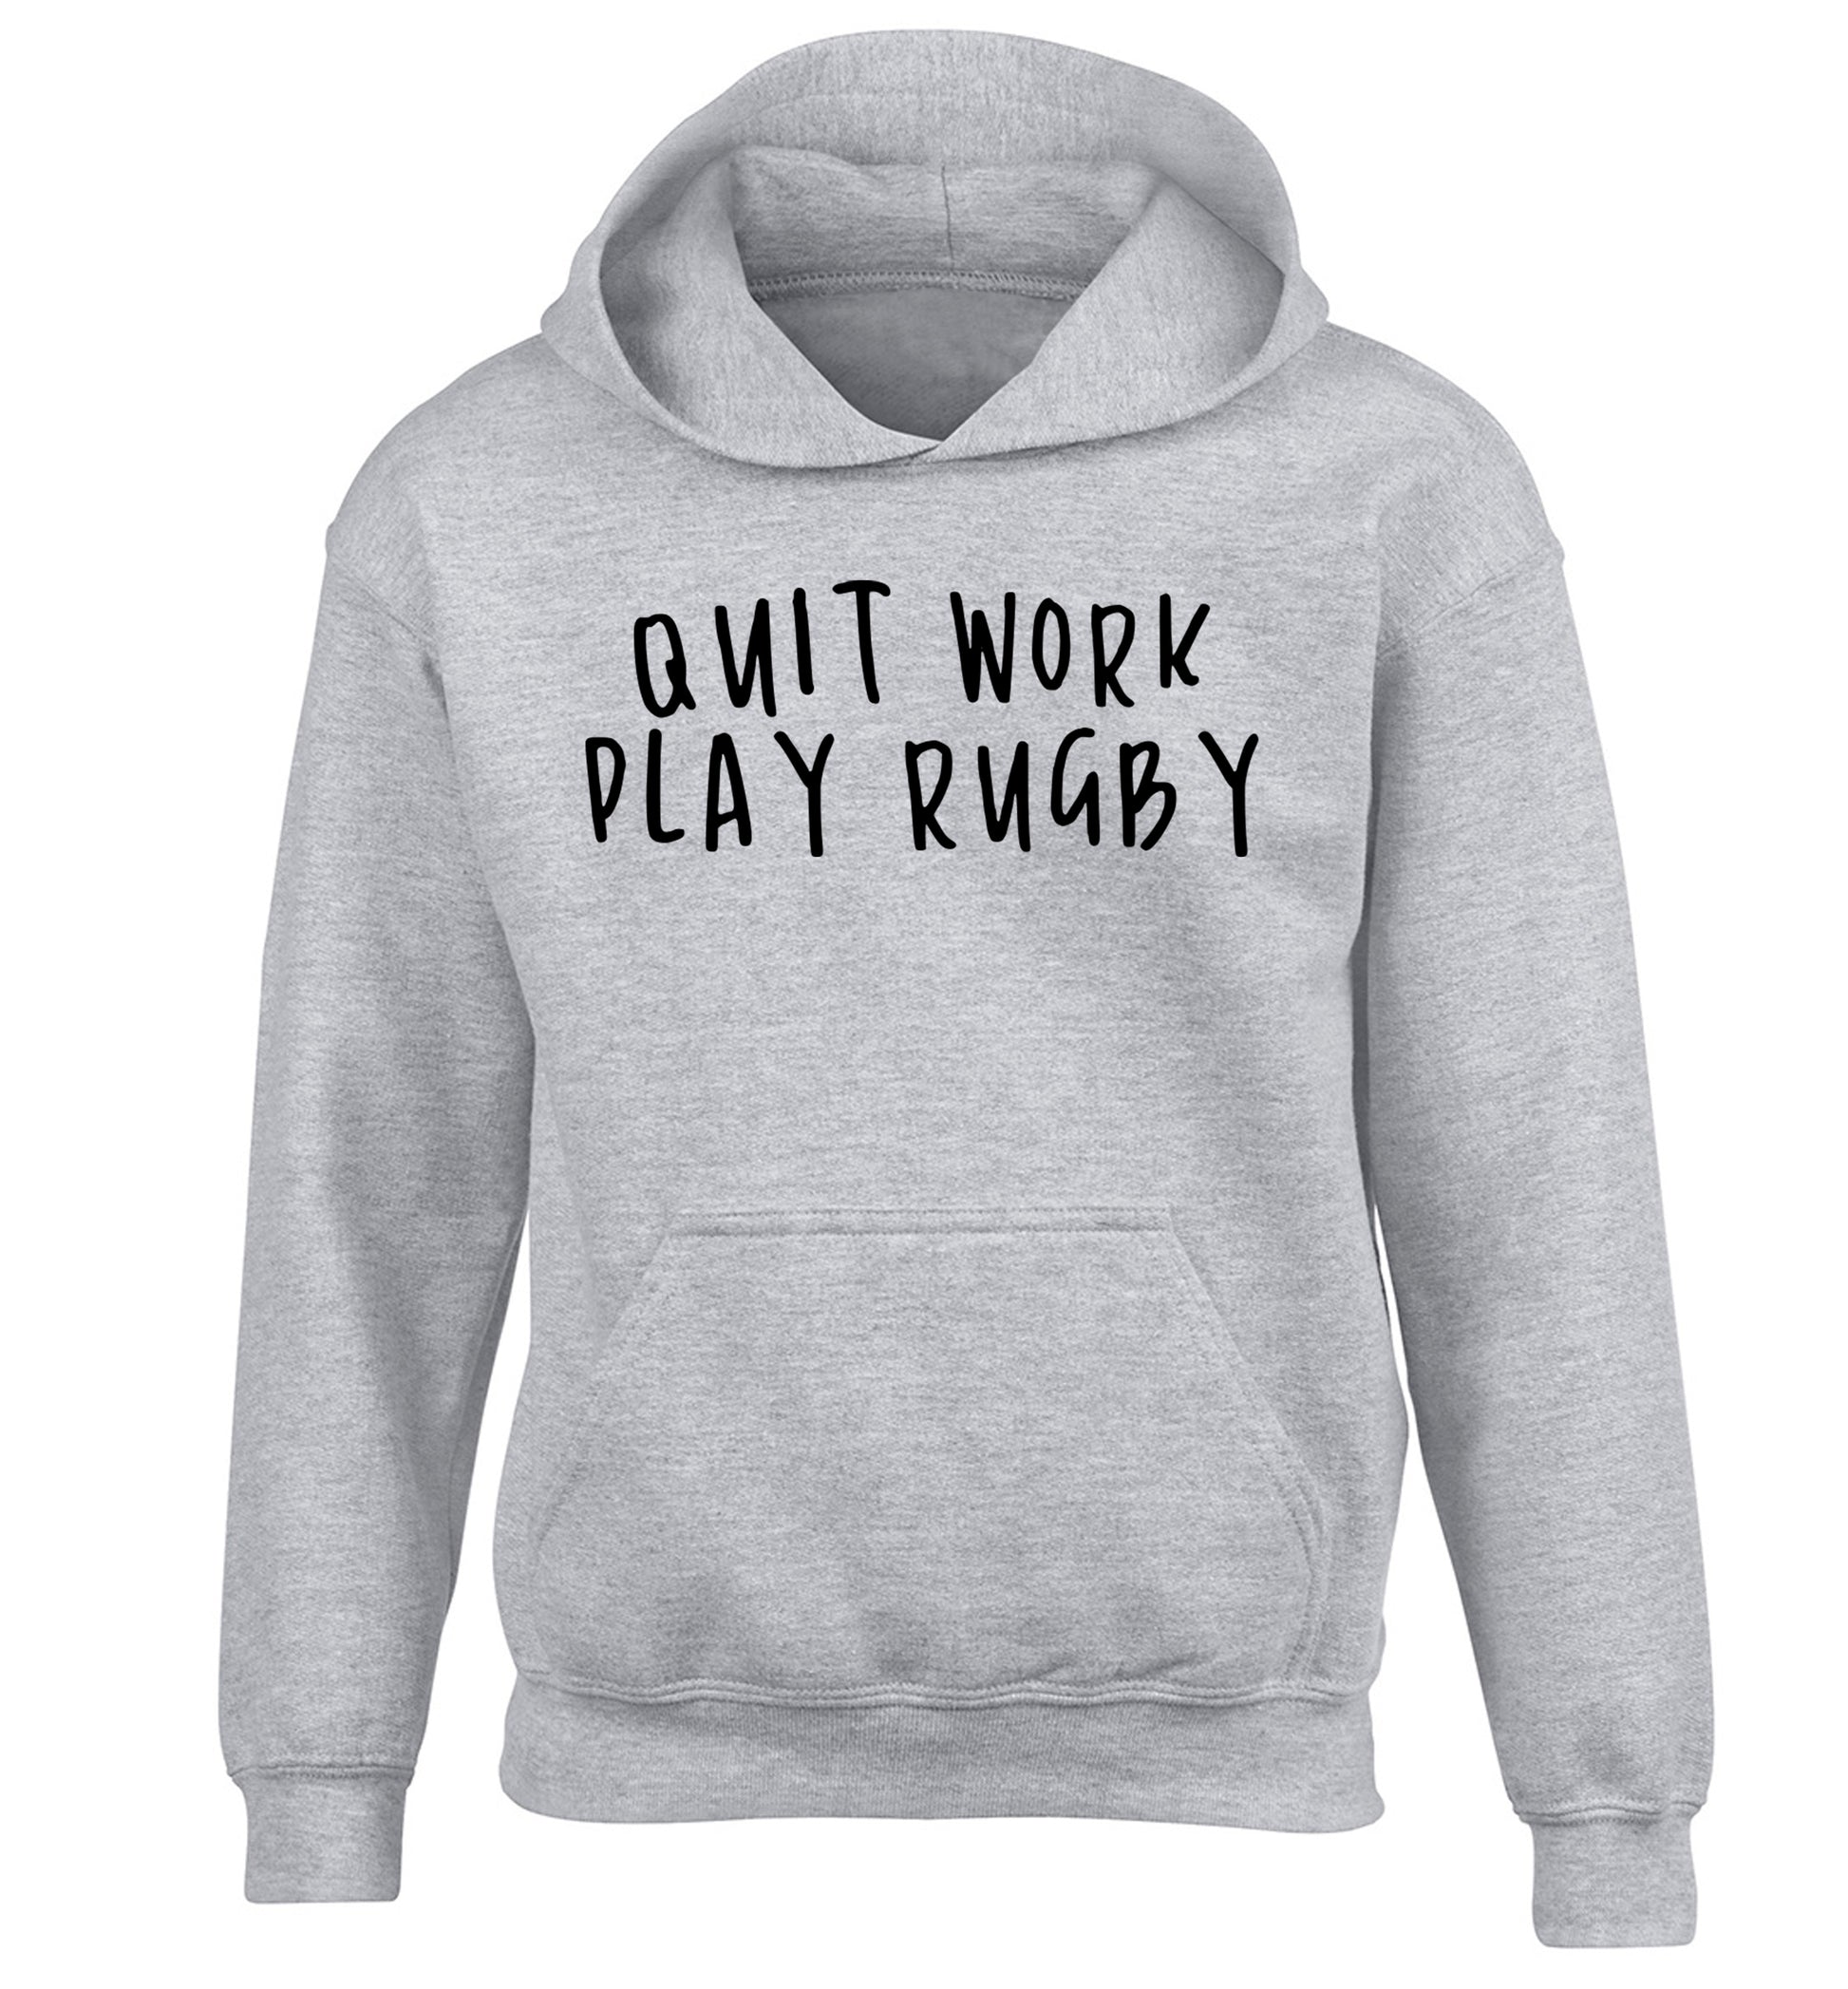 Quit work play rugby children's grey hoodie 12-13 Years